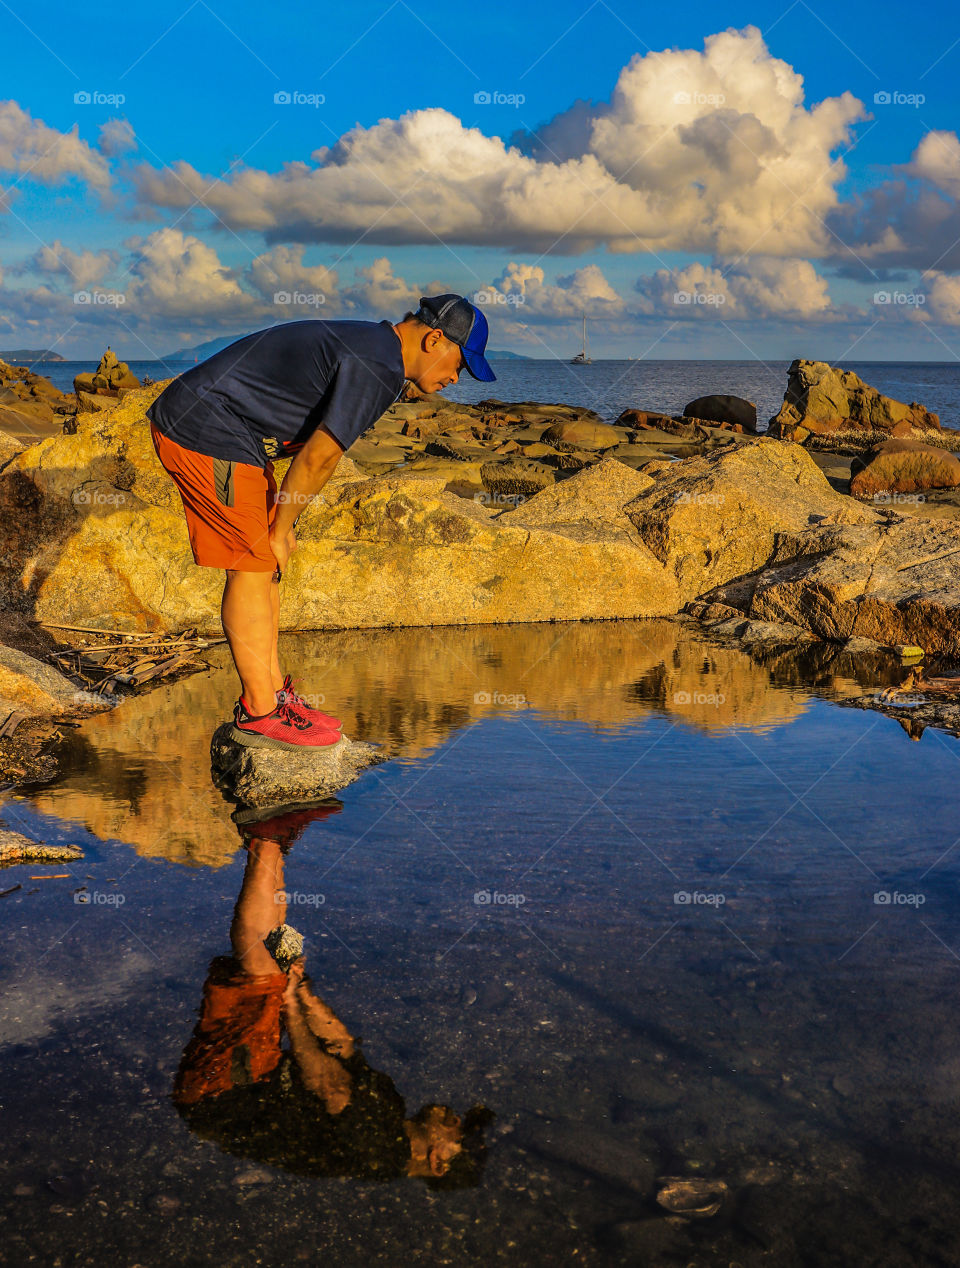 A man observing some marine species on a pond at a nearby Beach during the day time. The reflections from the water, the blue skies, ample clouds and the rock formations caught my interest.